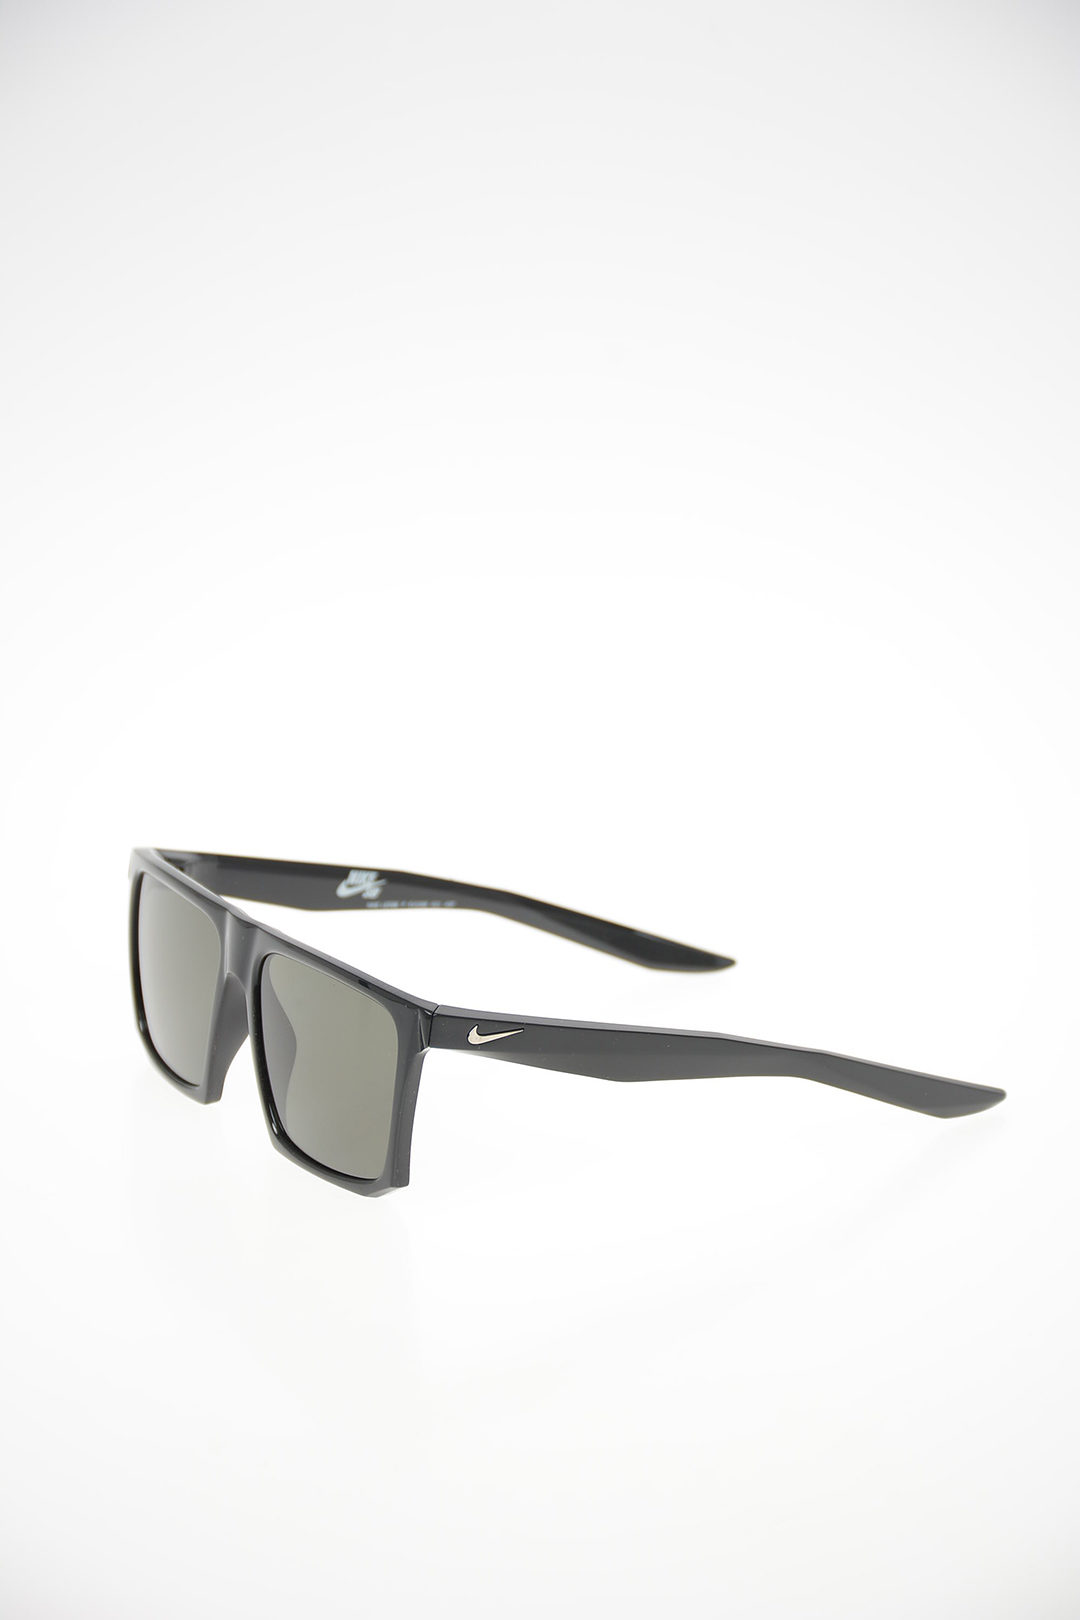 nike outlet sunglasses